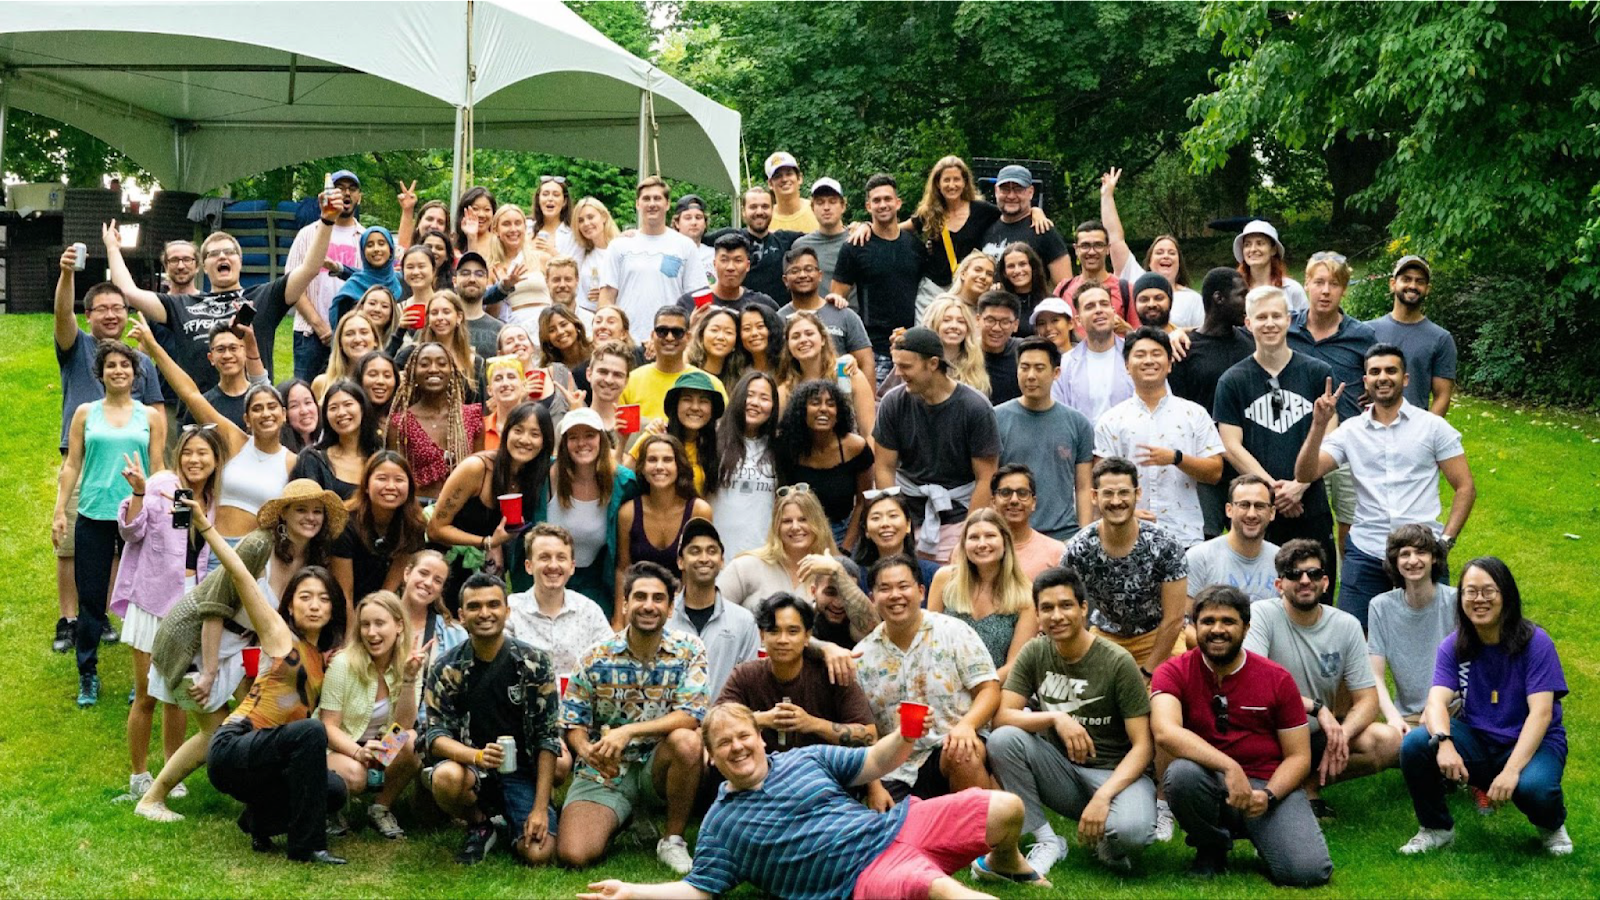 Large group shot of Perpetua employees and co-op students outside at a summer event